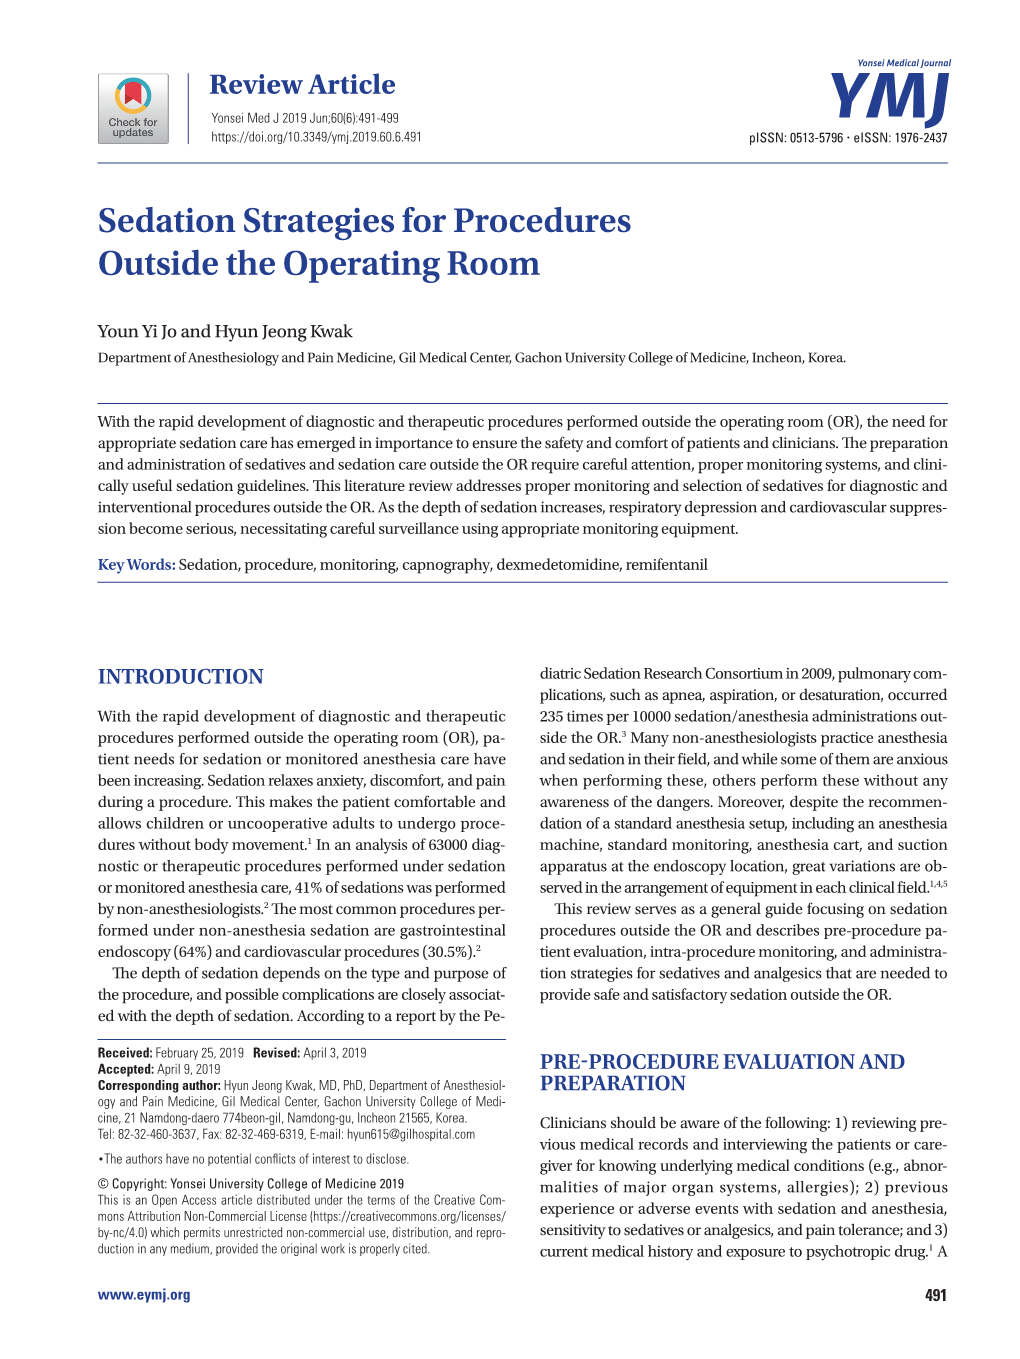 Sedation Strategies for Procedures Outside the Operating Room